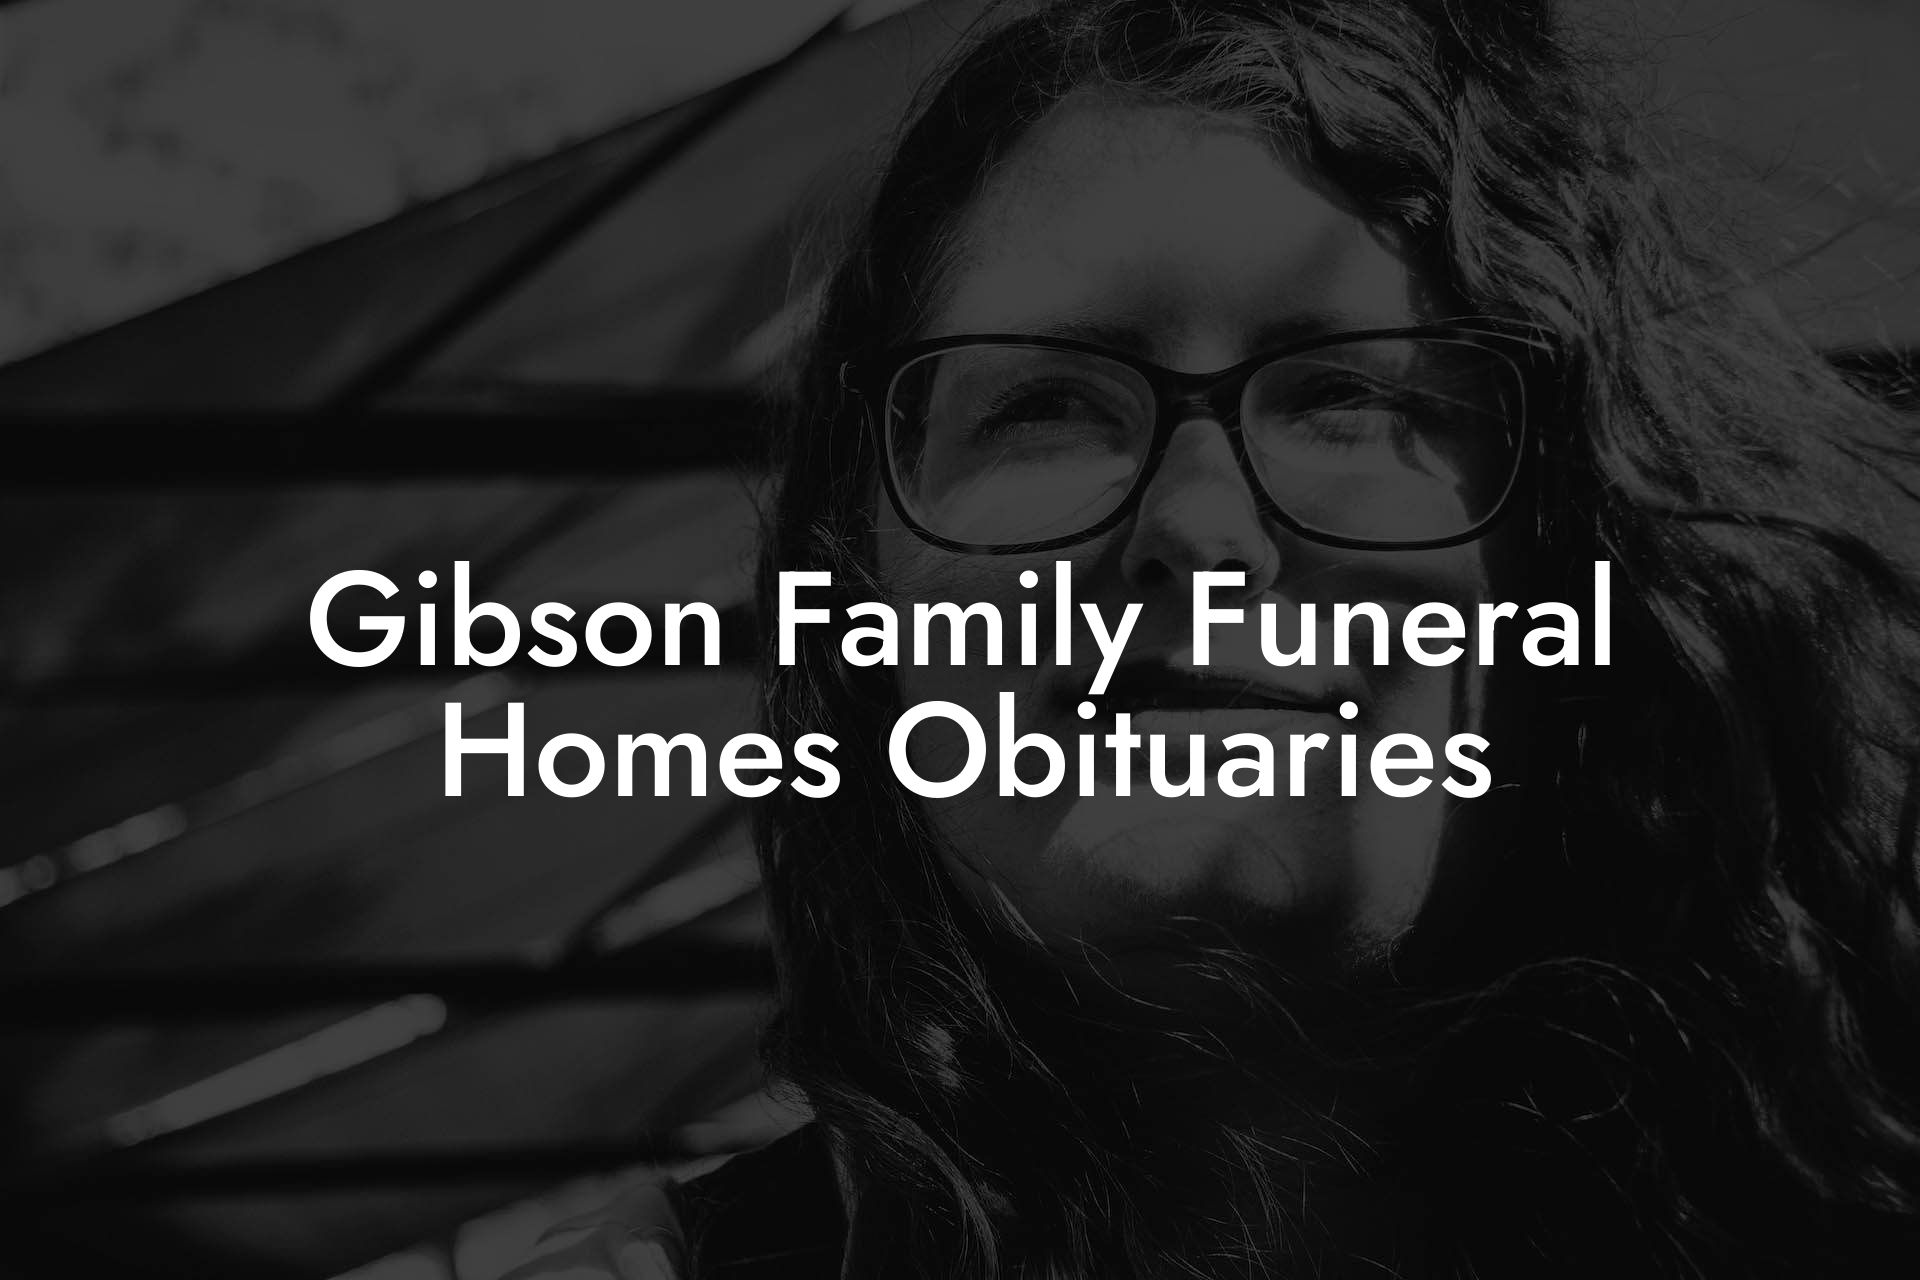 Gibson Family Funeral Homes Obituaries